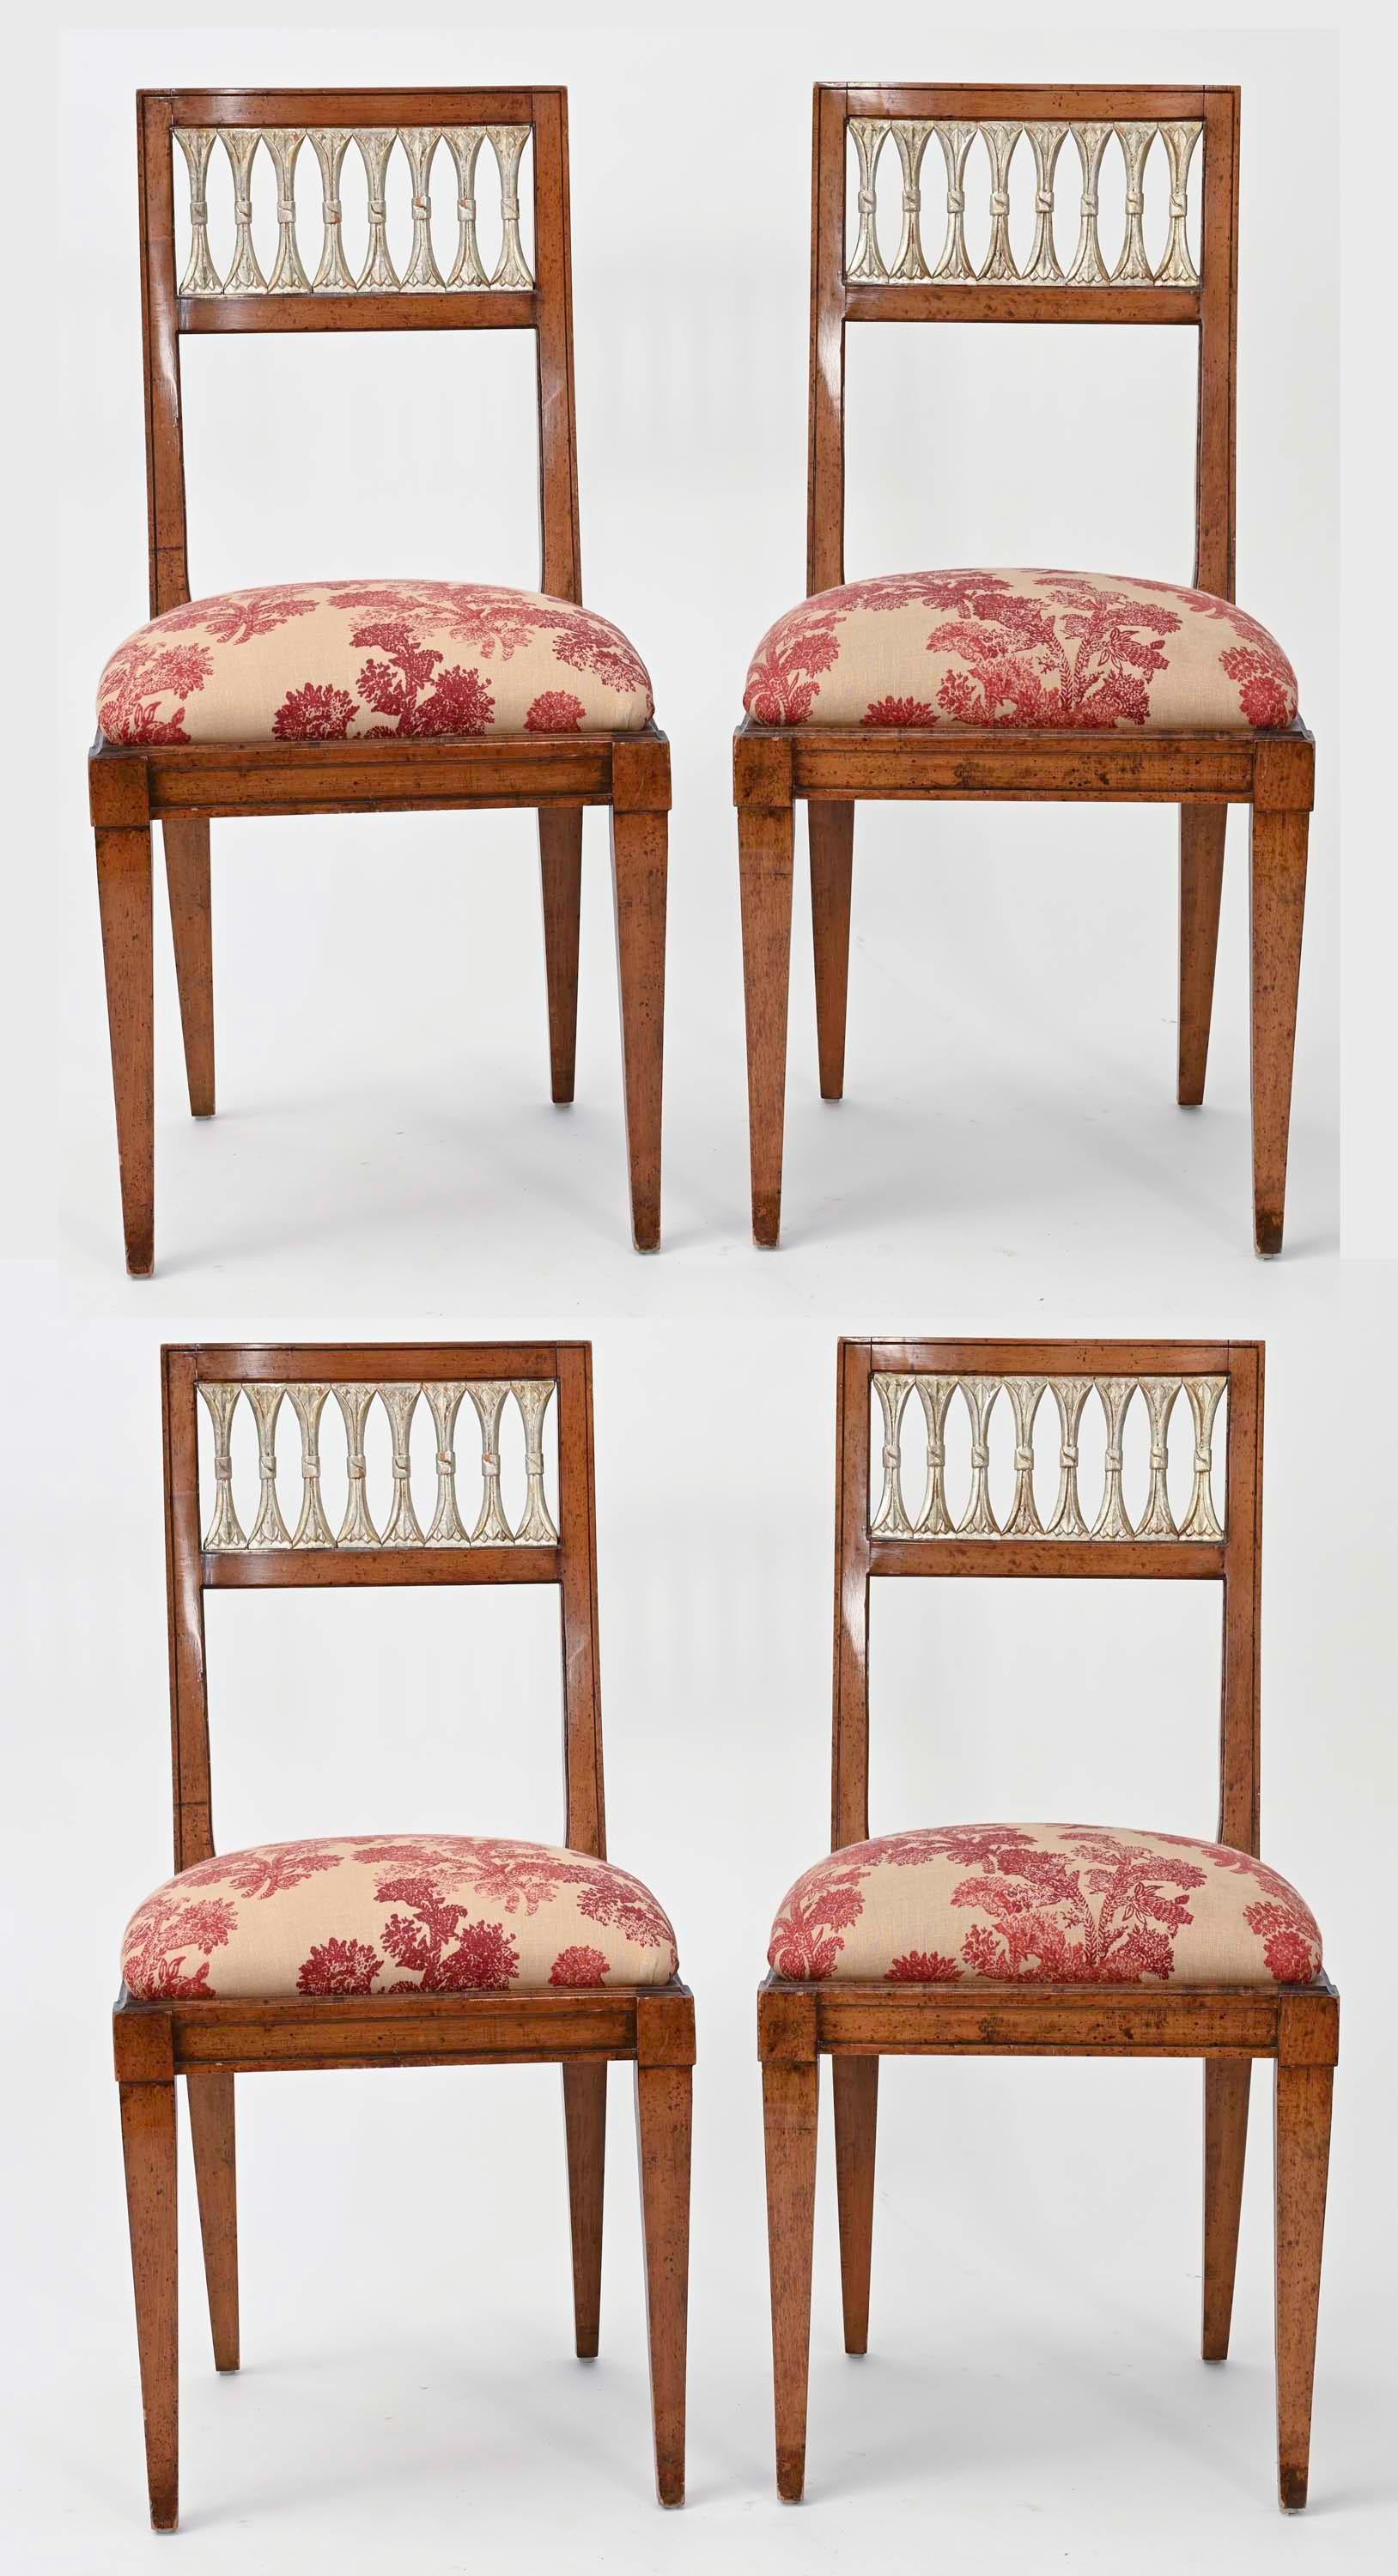 Wonderfully charming set of French side chairs. Solid walnut wood with wonderful patina. Back panels are carved cut ovals finished in accent silver leafing. Newly upholstered in red toil fabric. Very comfortable for breakfast table or game table.